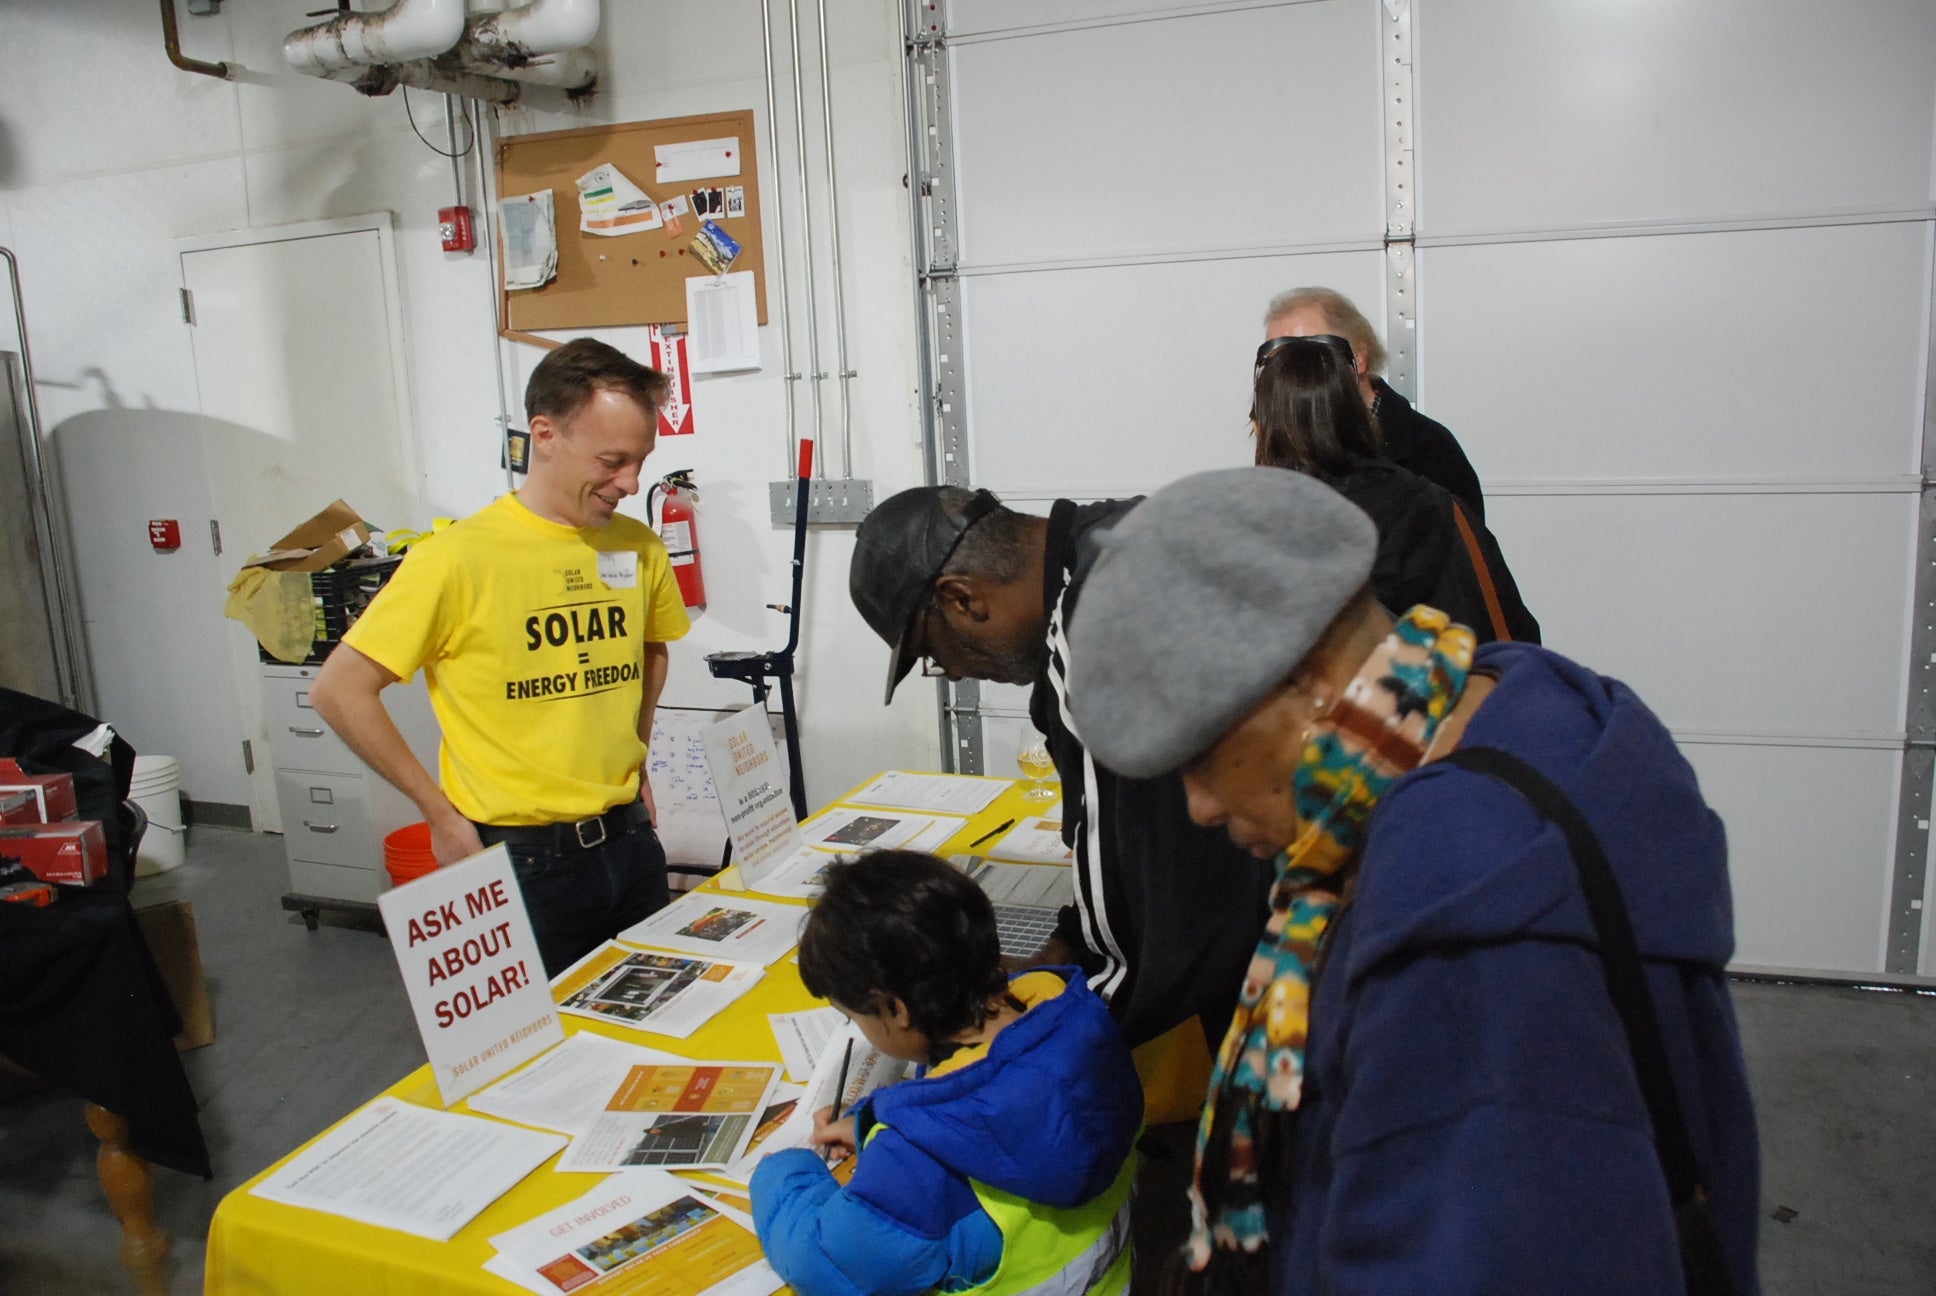 Solar supporters learn about going solar